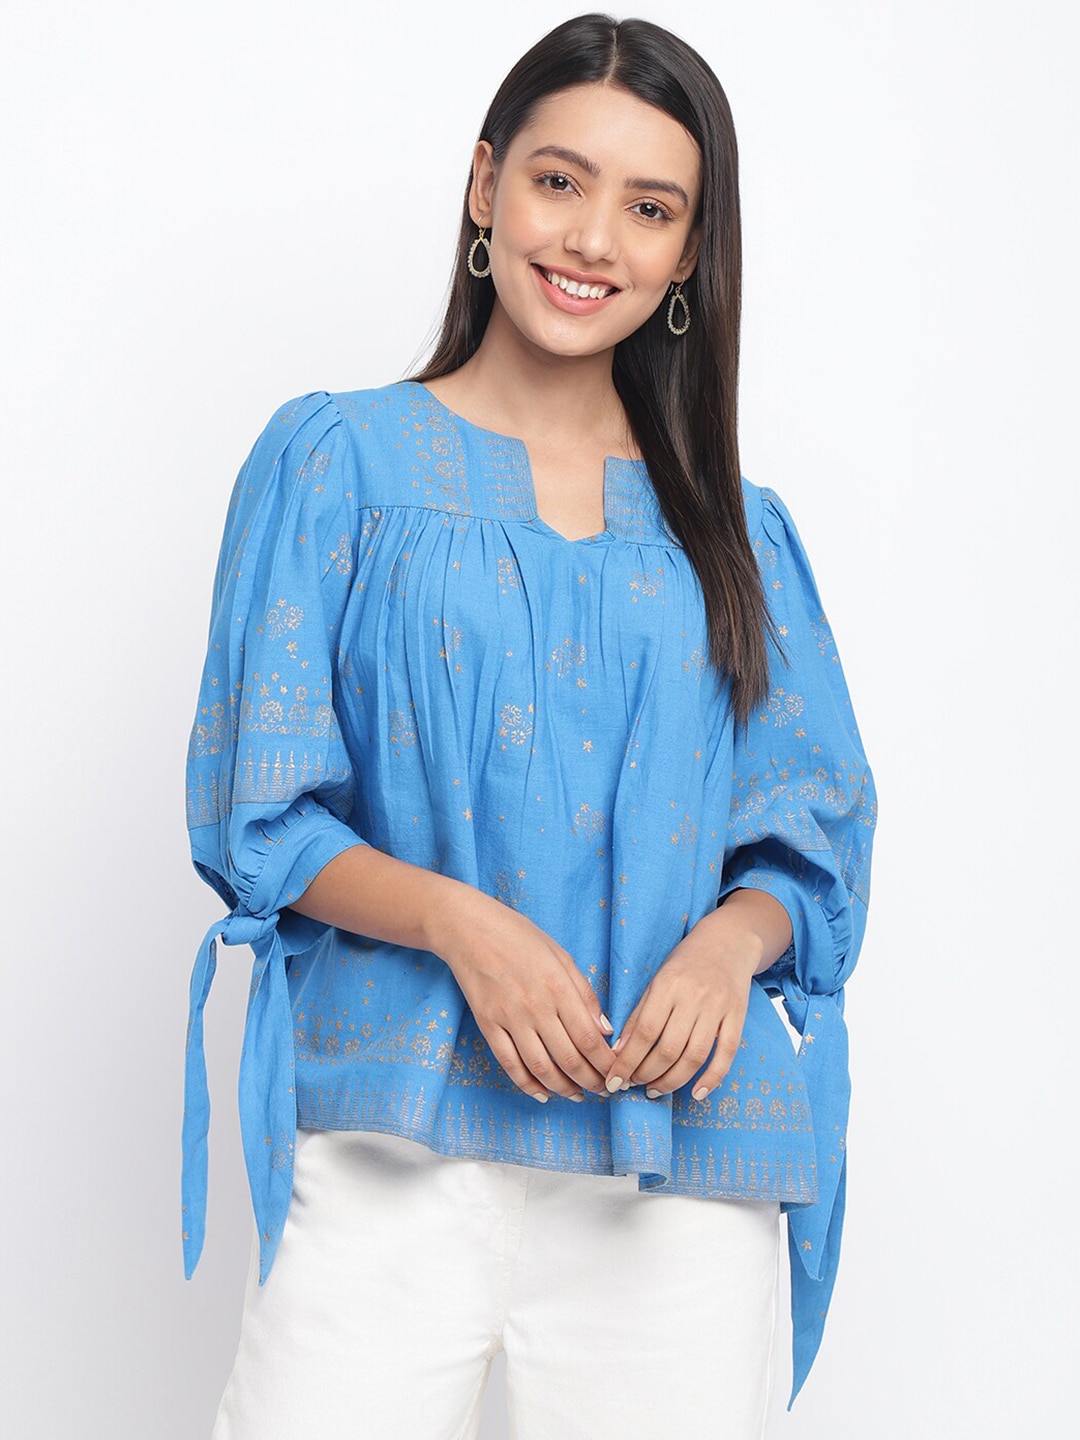 Fabindia Blue Printed A-Line Top Price in India